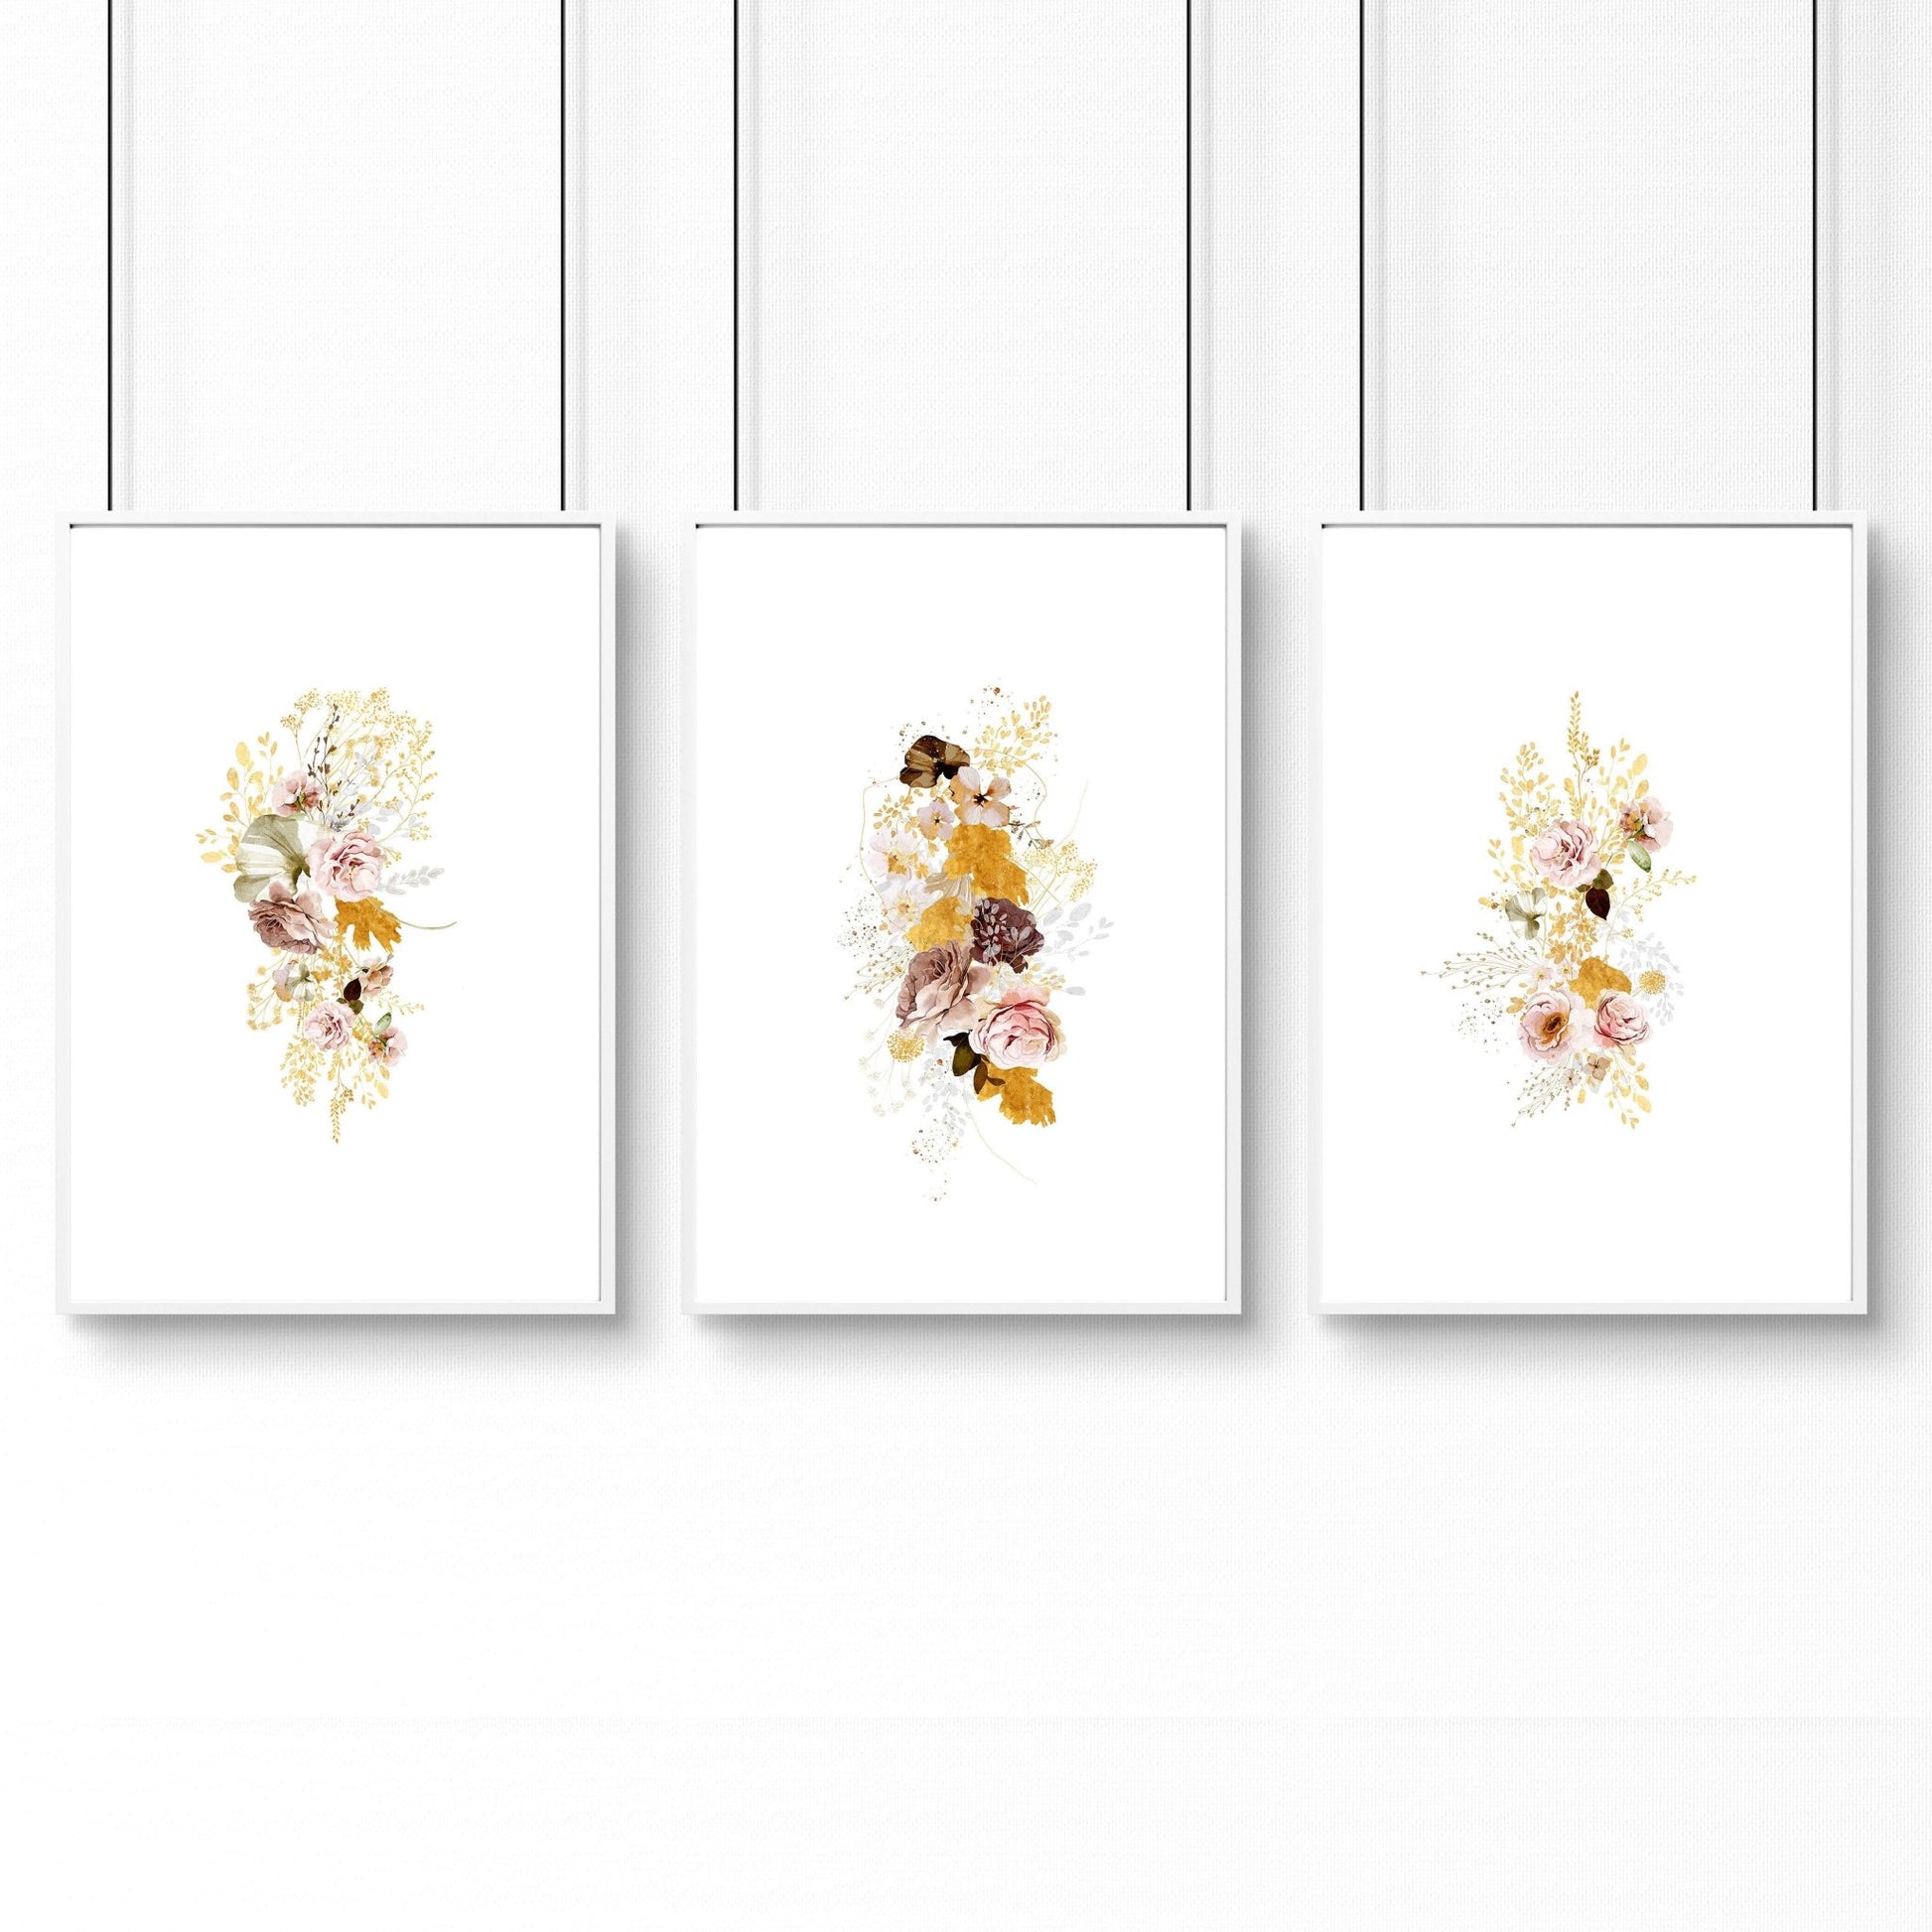 Artwork for a living room | set of 3 Shabby Chic wall art prints